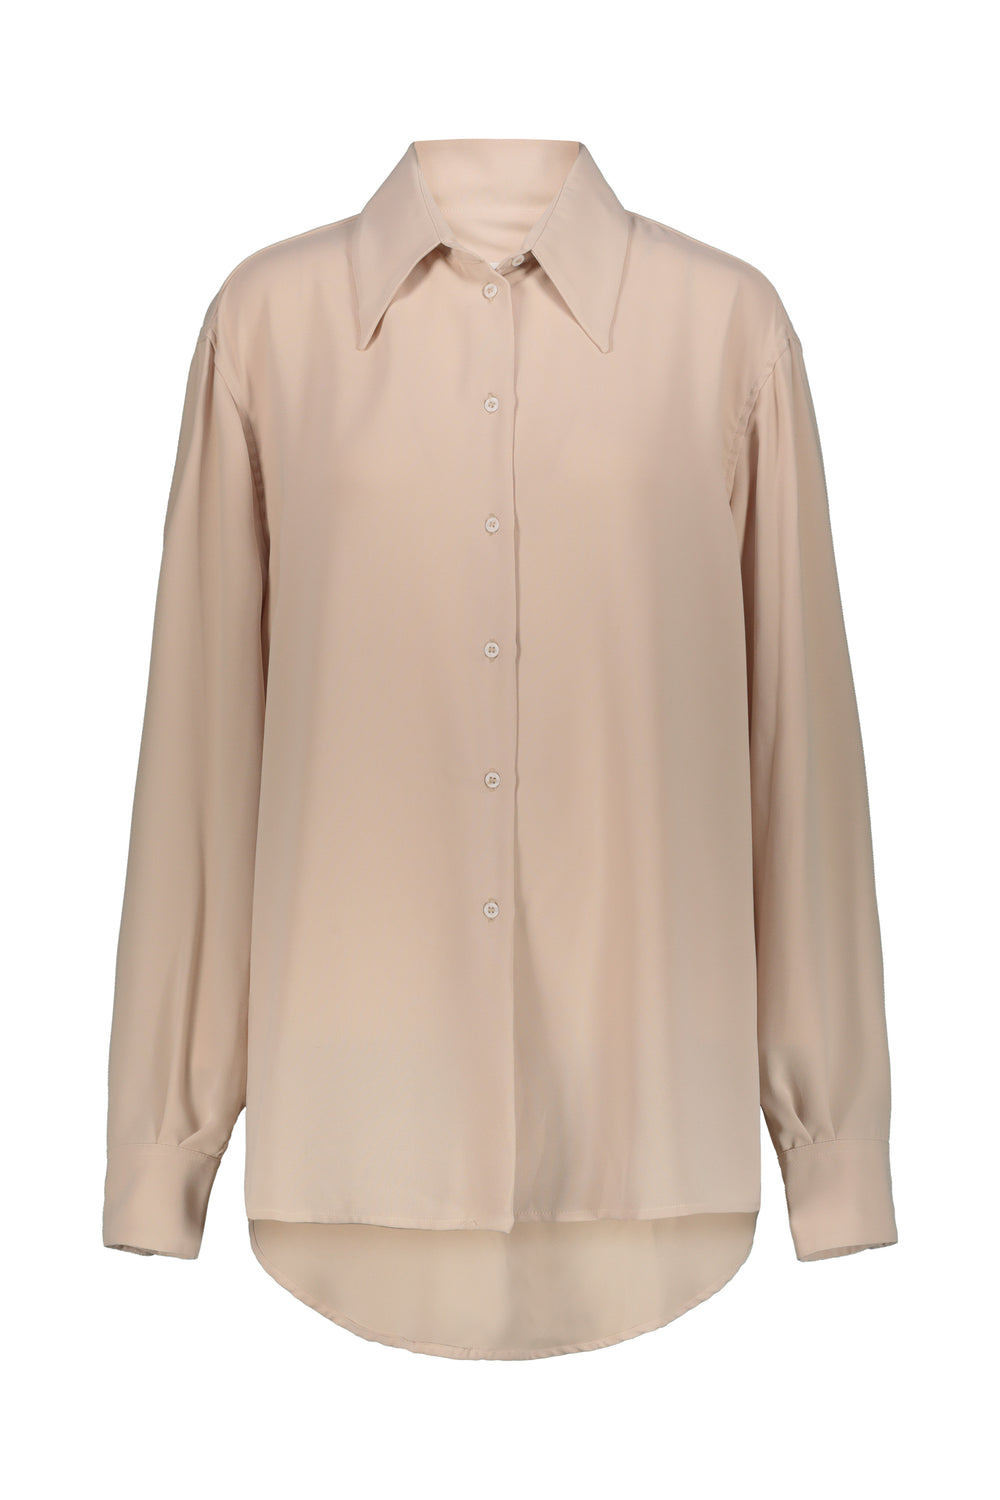 KAIA IN LIGHT PINK CREPE DE CHINE